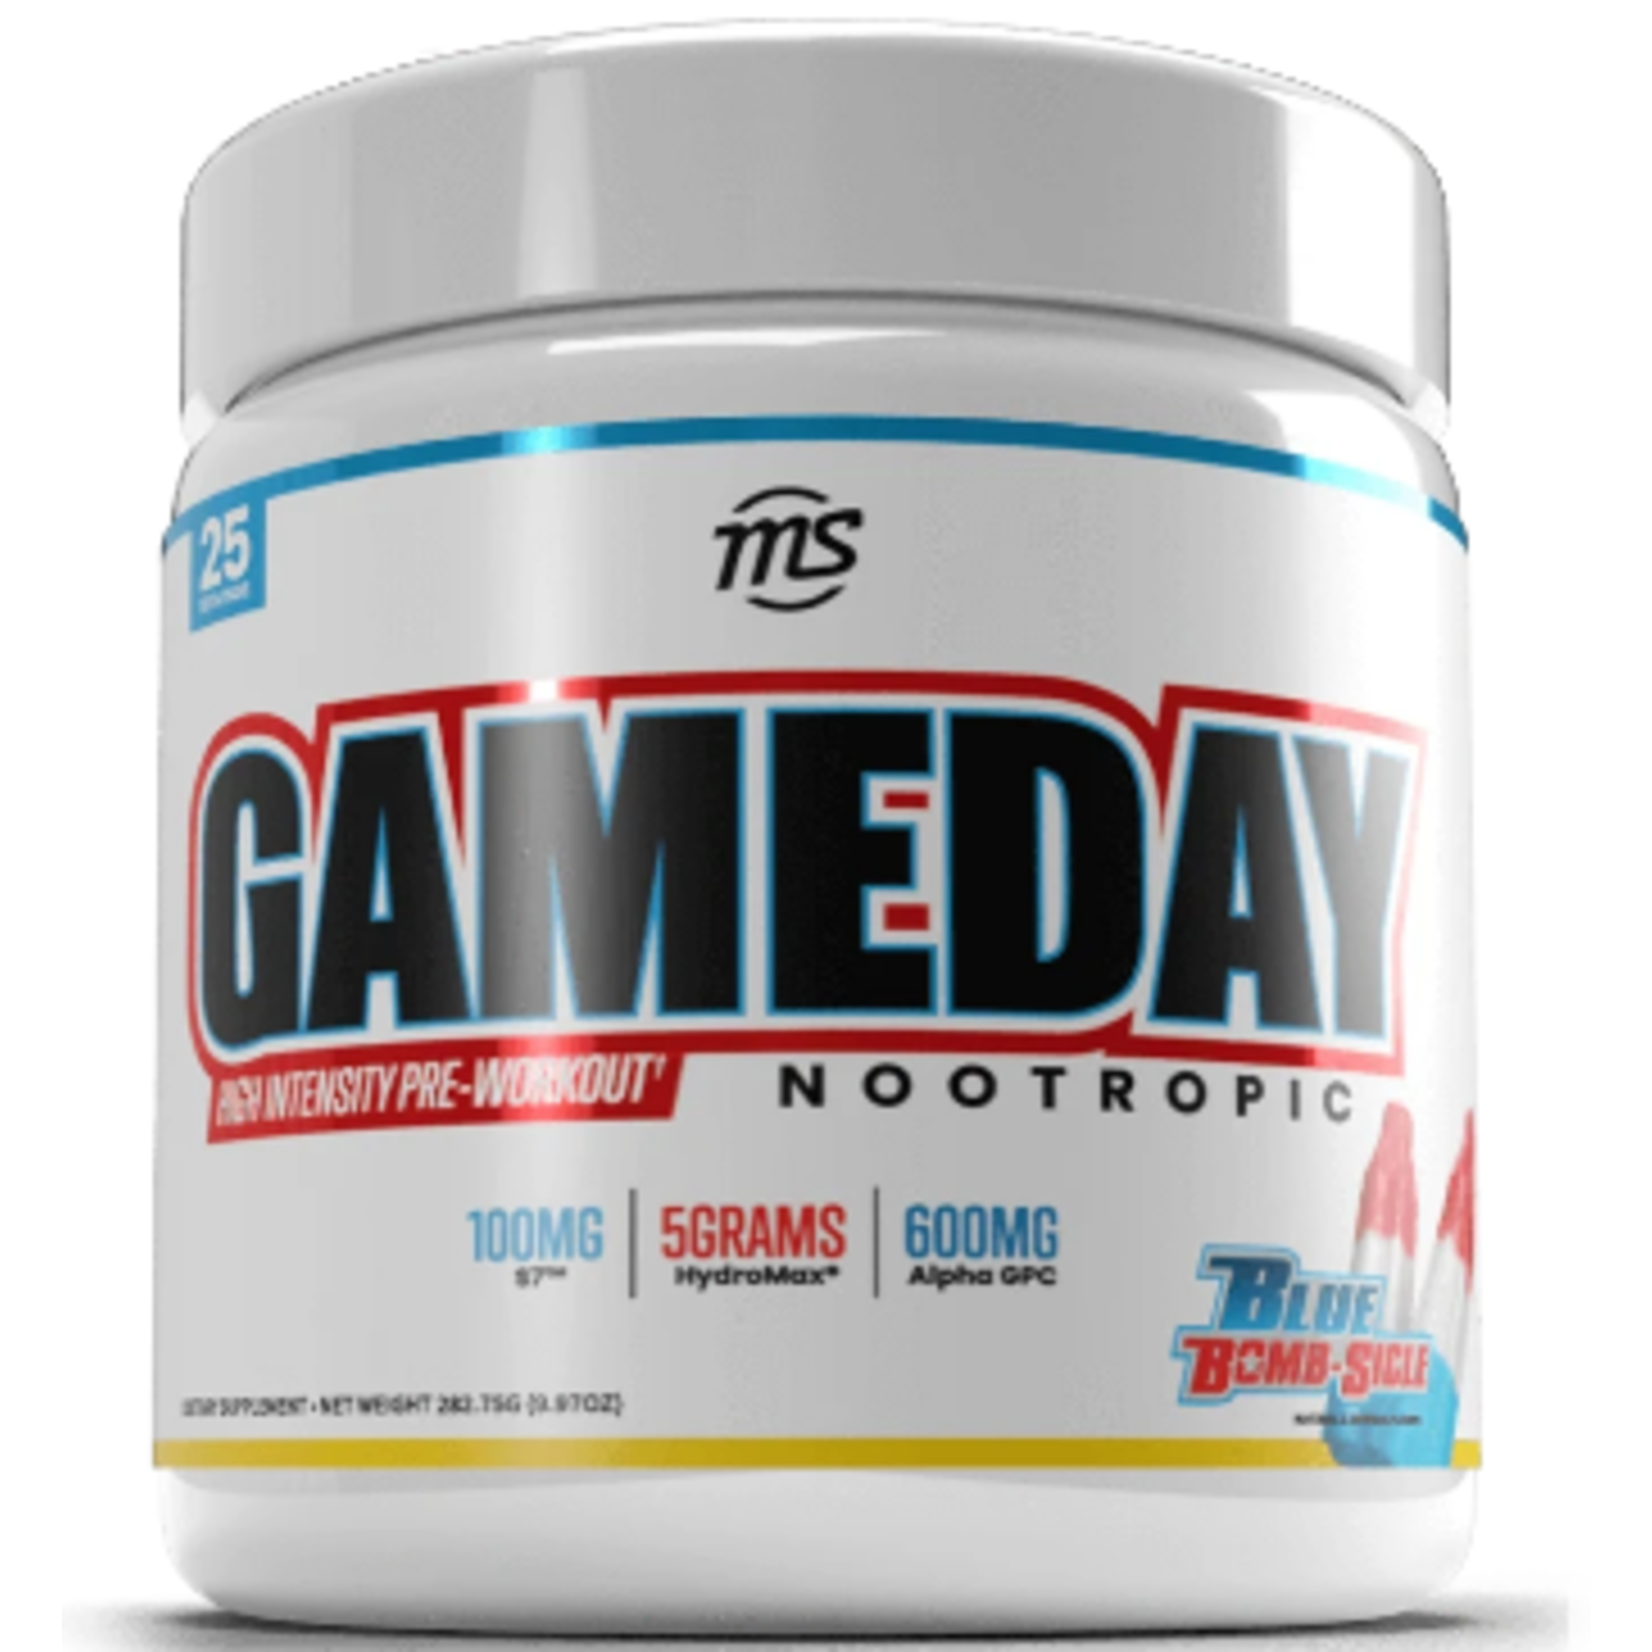 Man Sports Game Day Nootropic